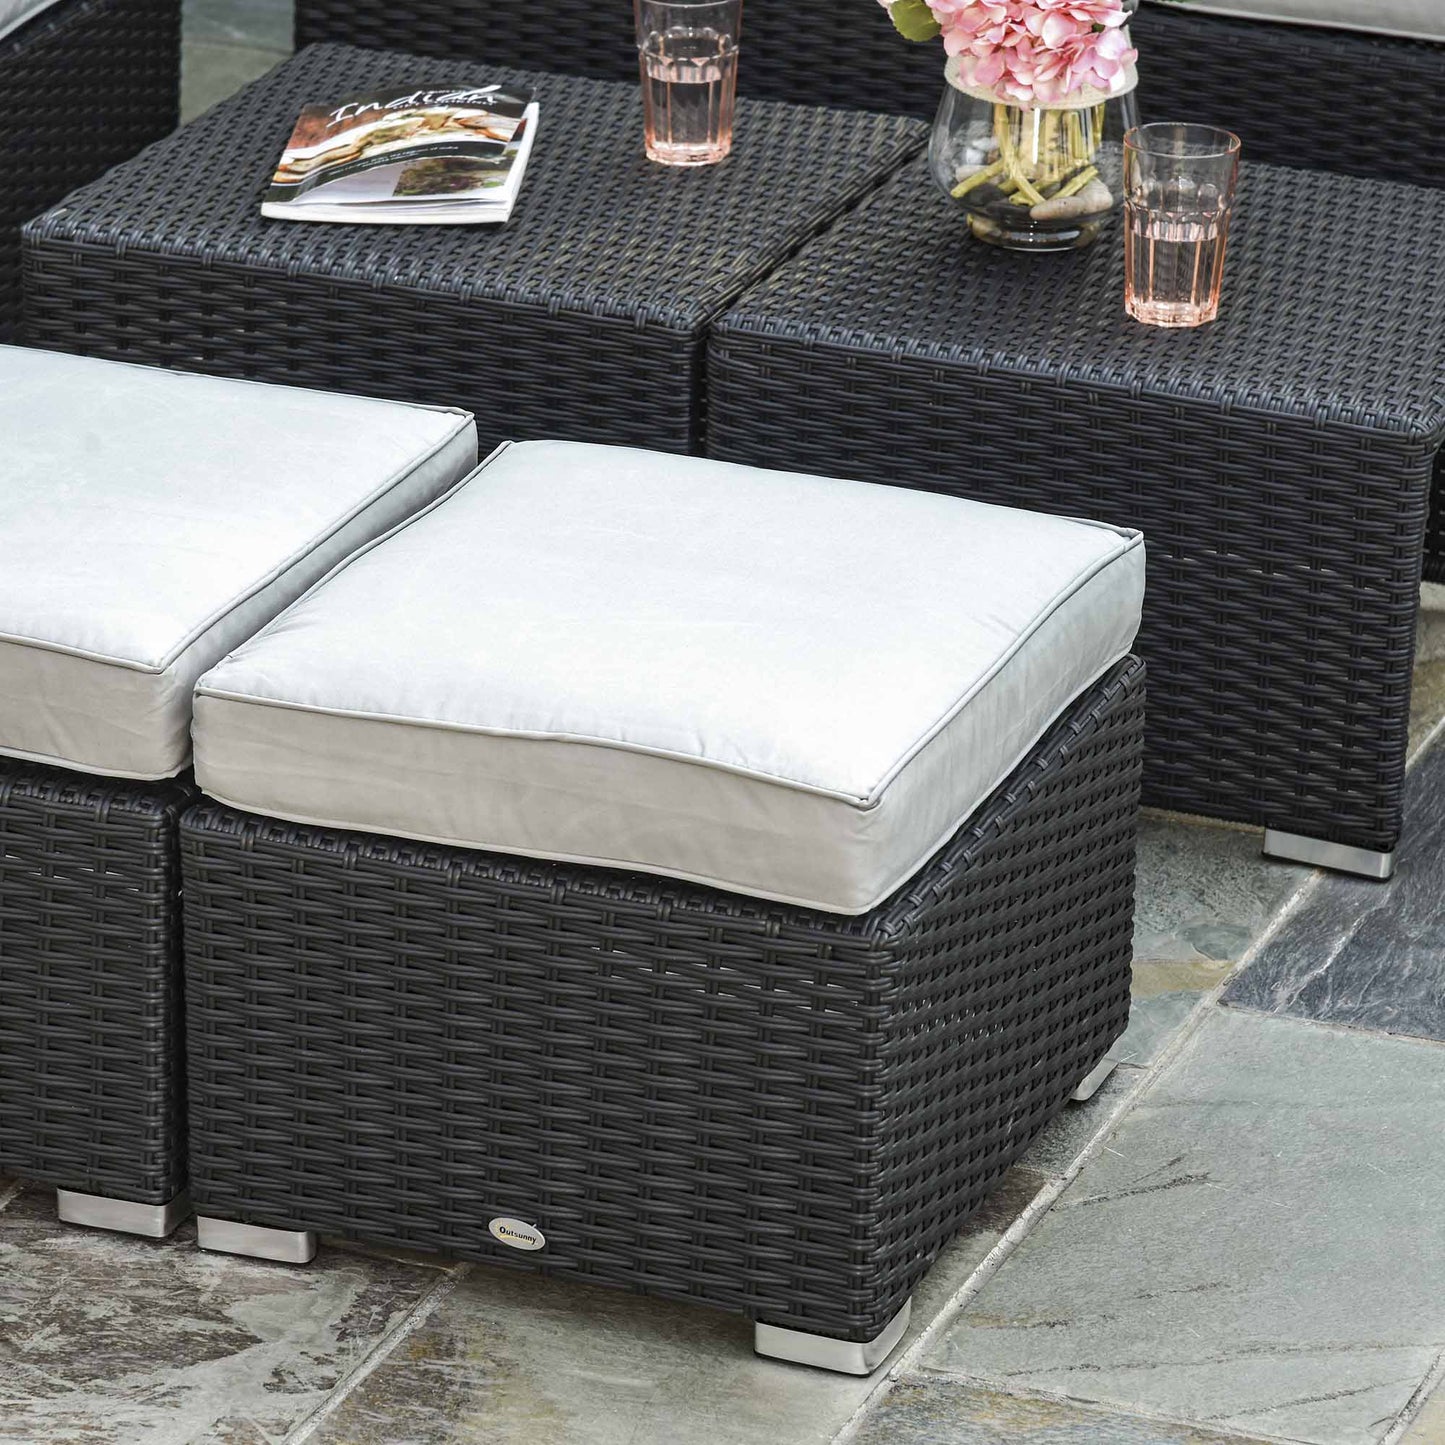 Outsunny 6-Seater Garden Rattan Wicker Sofa Set w/ Coffee Table, Wicker Weave Chair, Space-saving Footstool, Padded Cushions, Black